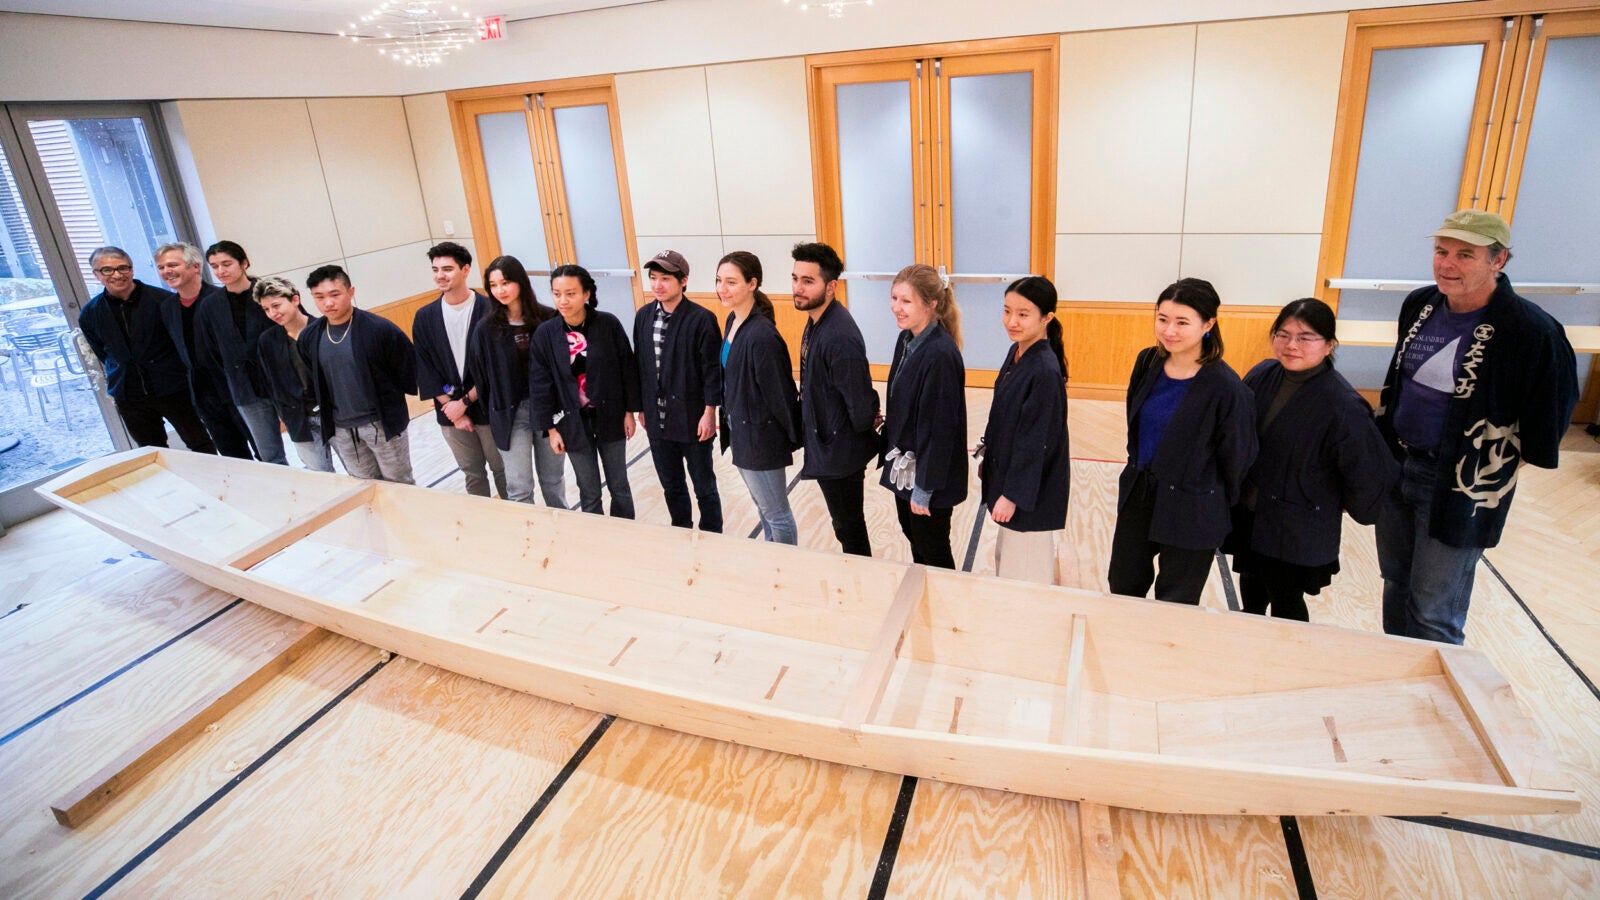 Students, Brooks, and members of the Reischauer Institute, who made the project possible, pose with the completed riverboat in the classroom workshop.